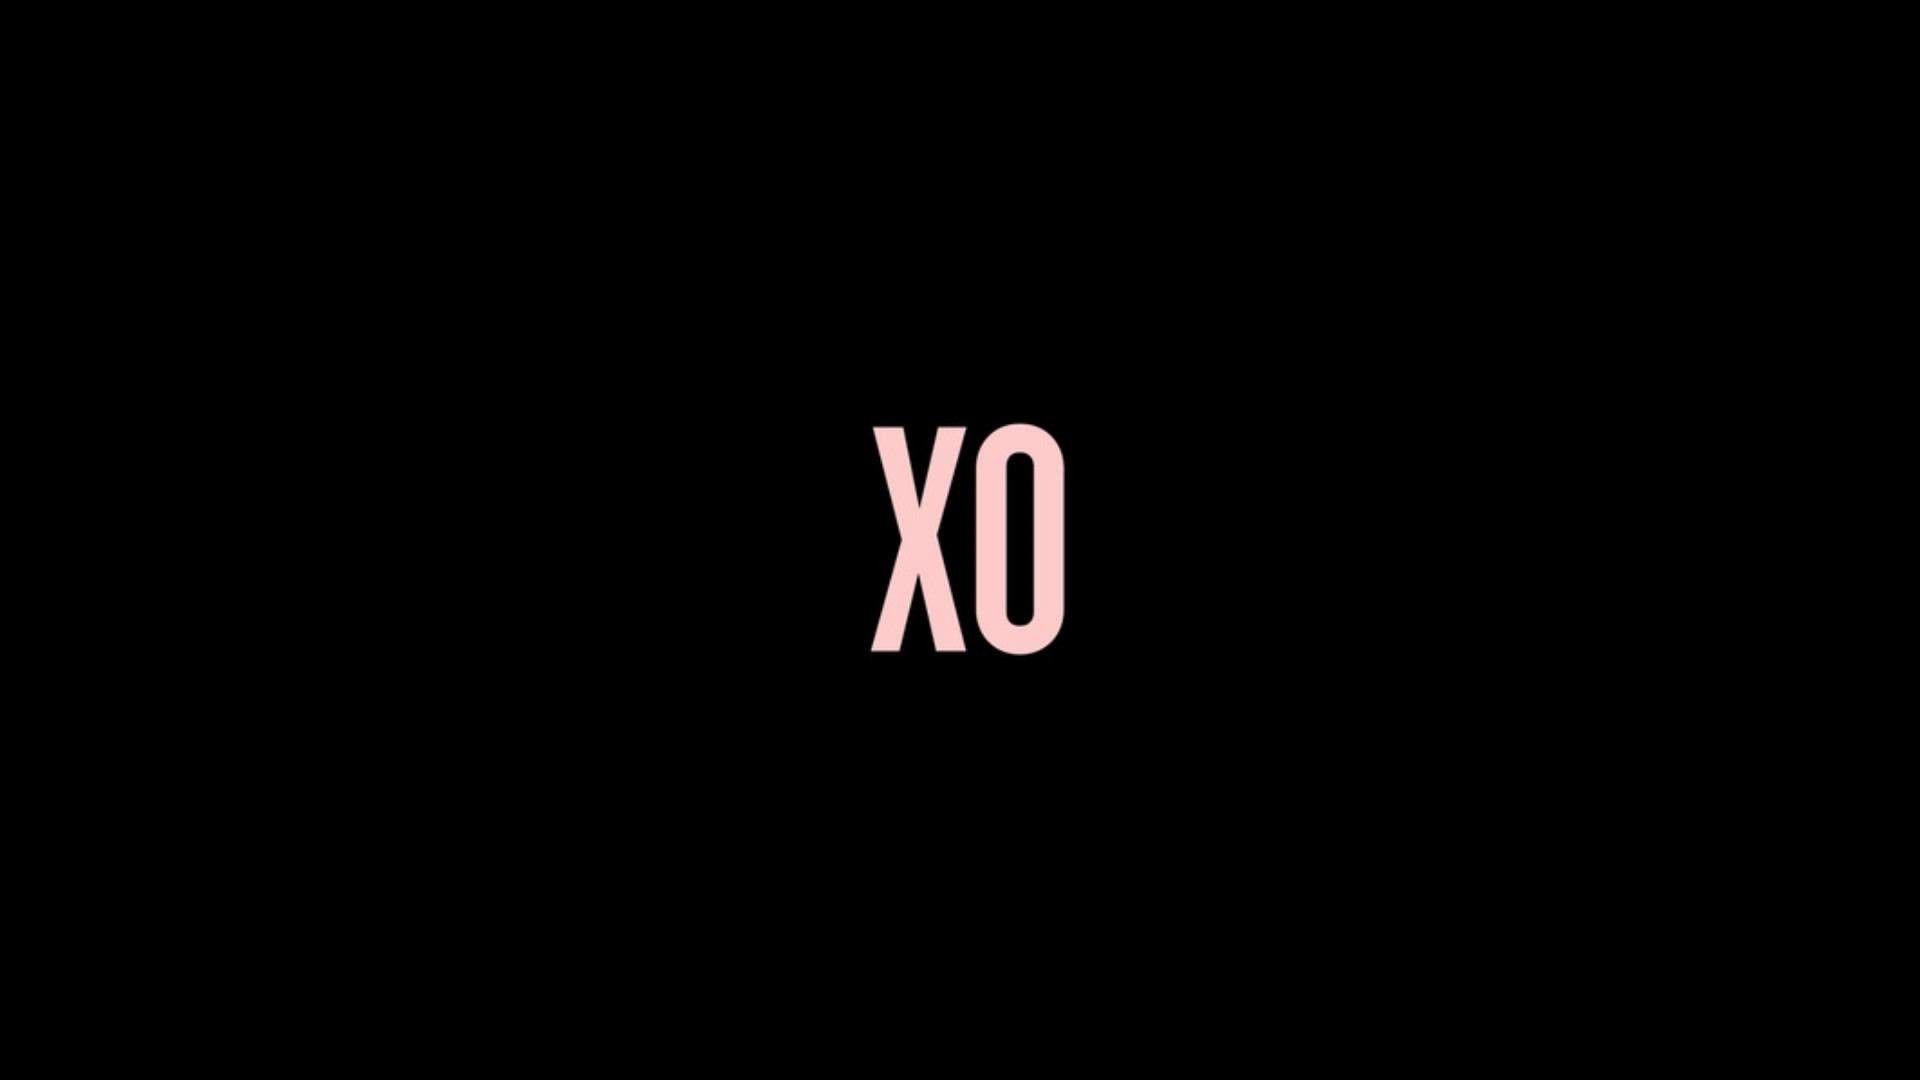 The Weeknd Xo Wallpaper Outlet Clearance, Save 46% | jlcatj.gob.mx